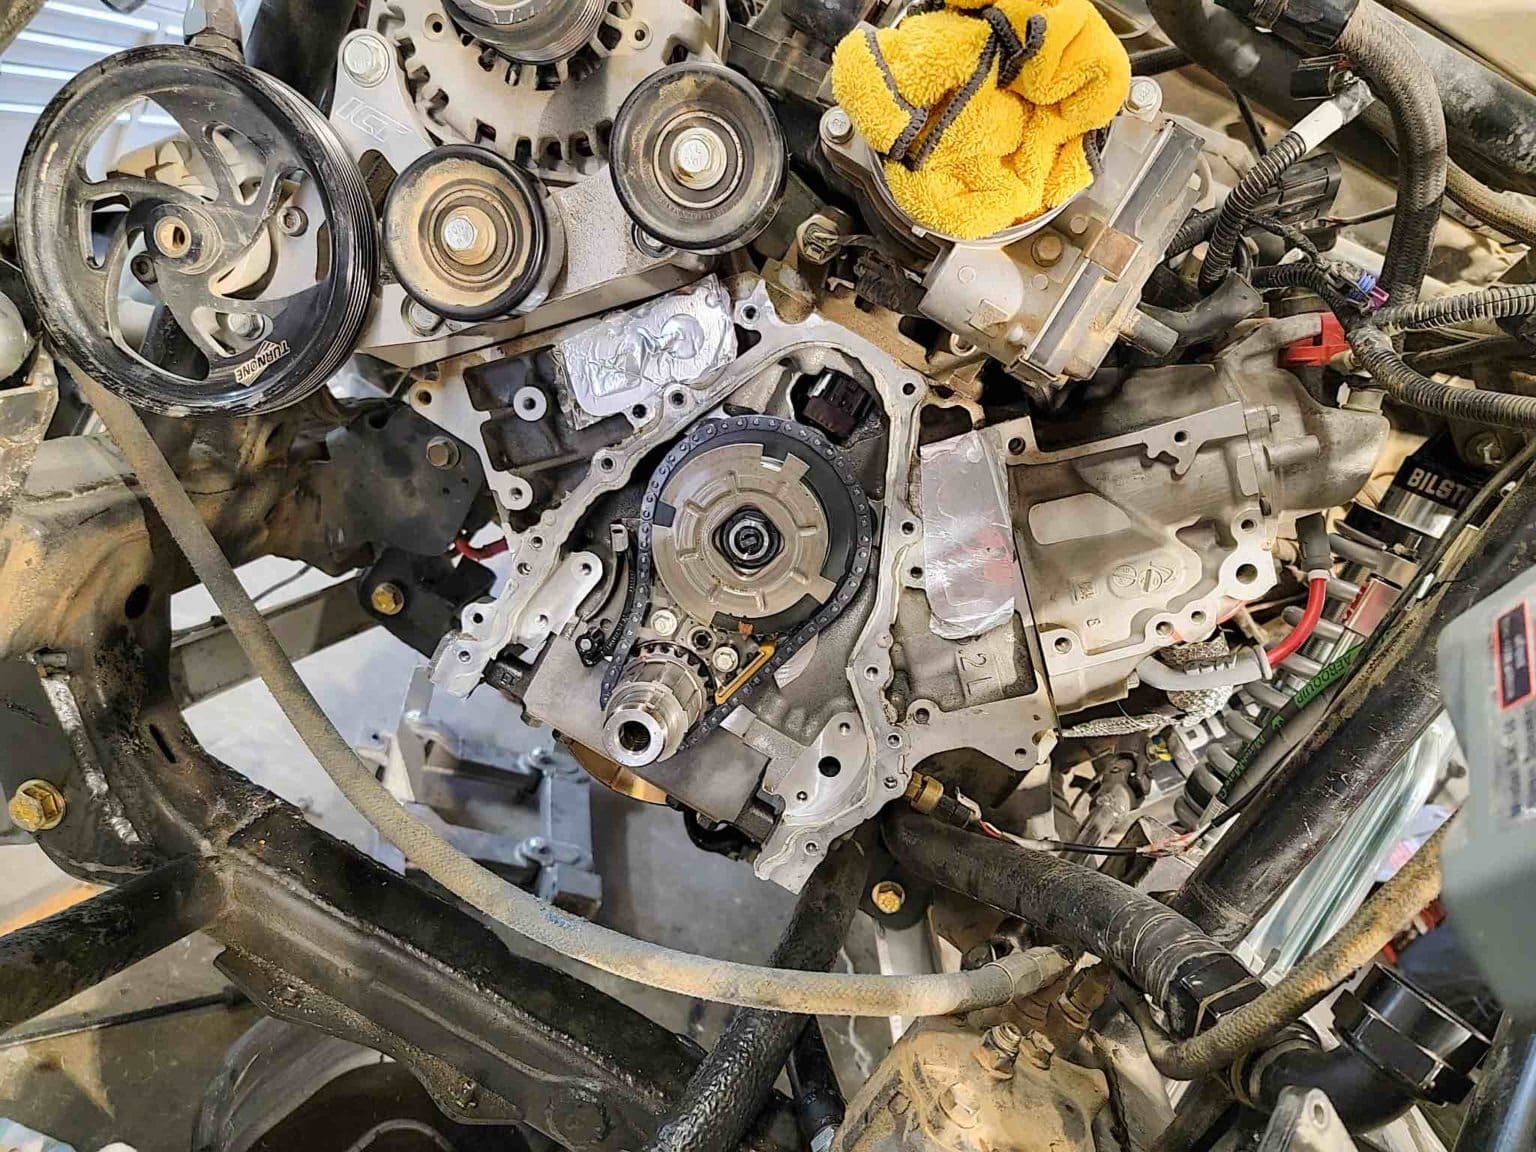 The engine of a racing truck